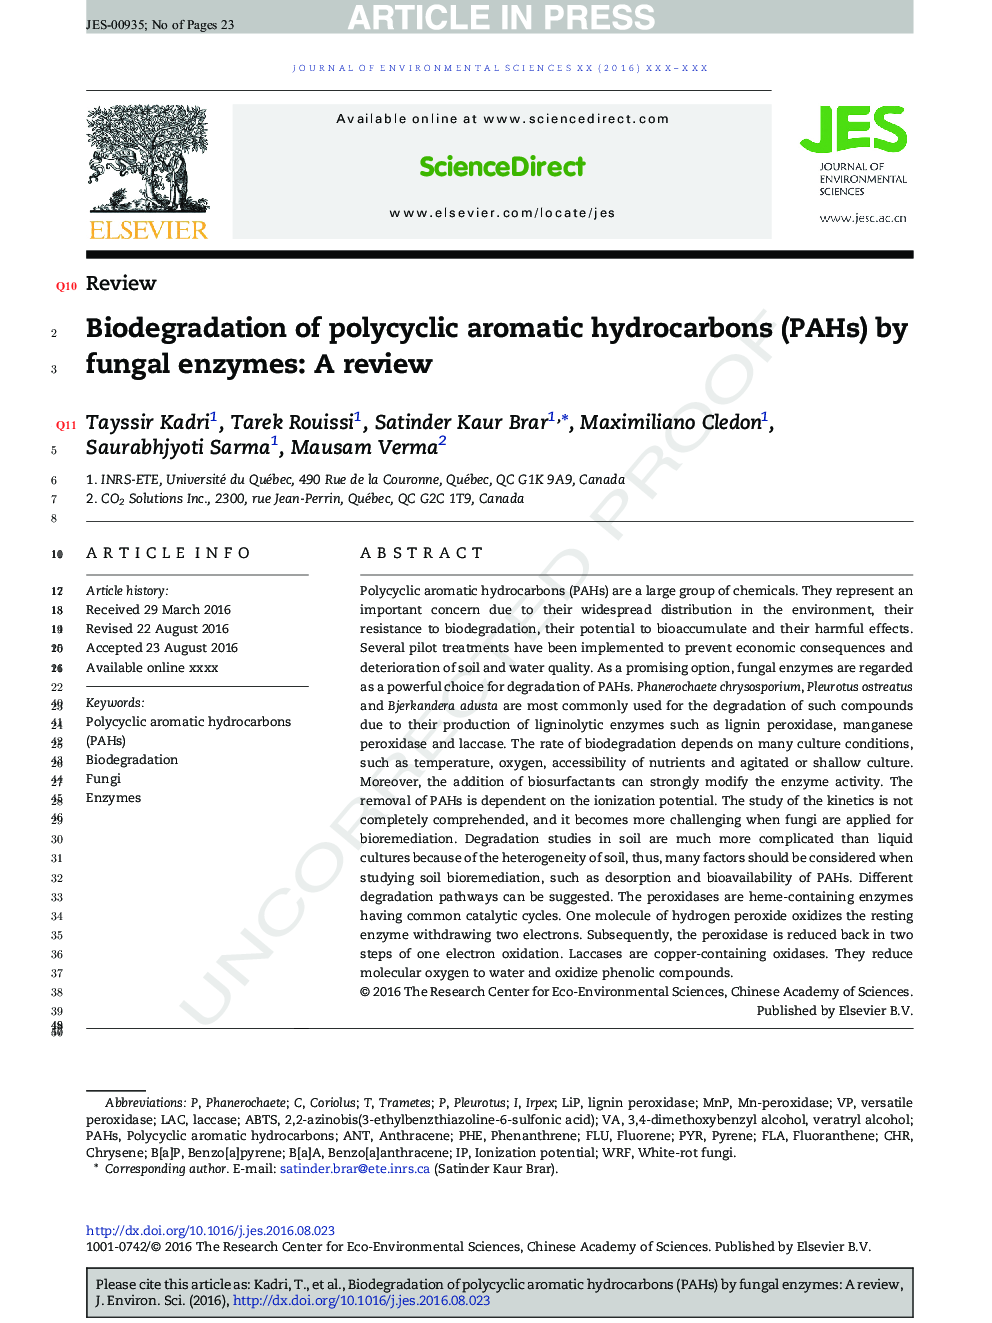 Biodegradation of polycyclic aromatic hydrocarbons (PAHs) by fungal enzymes: A review